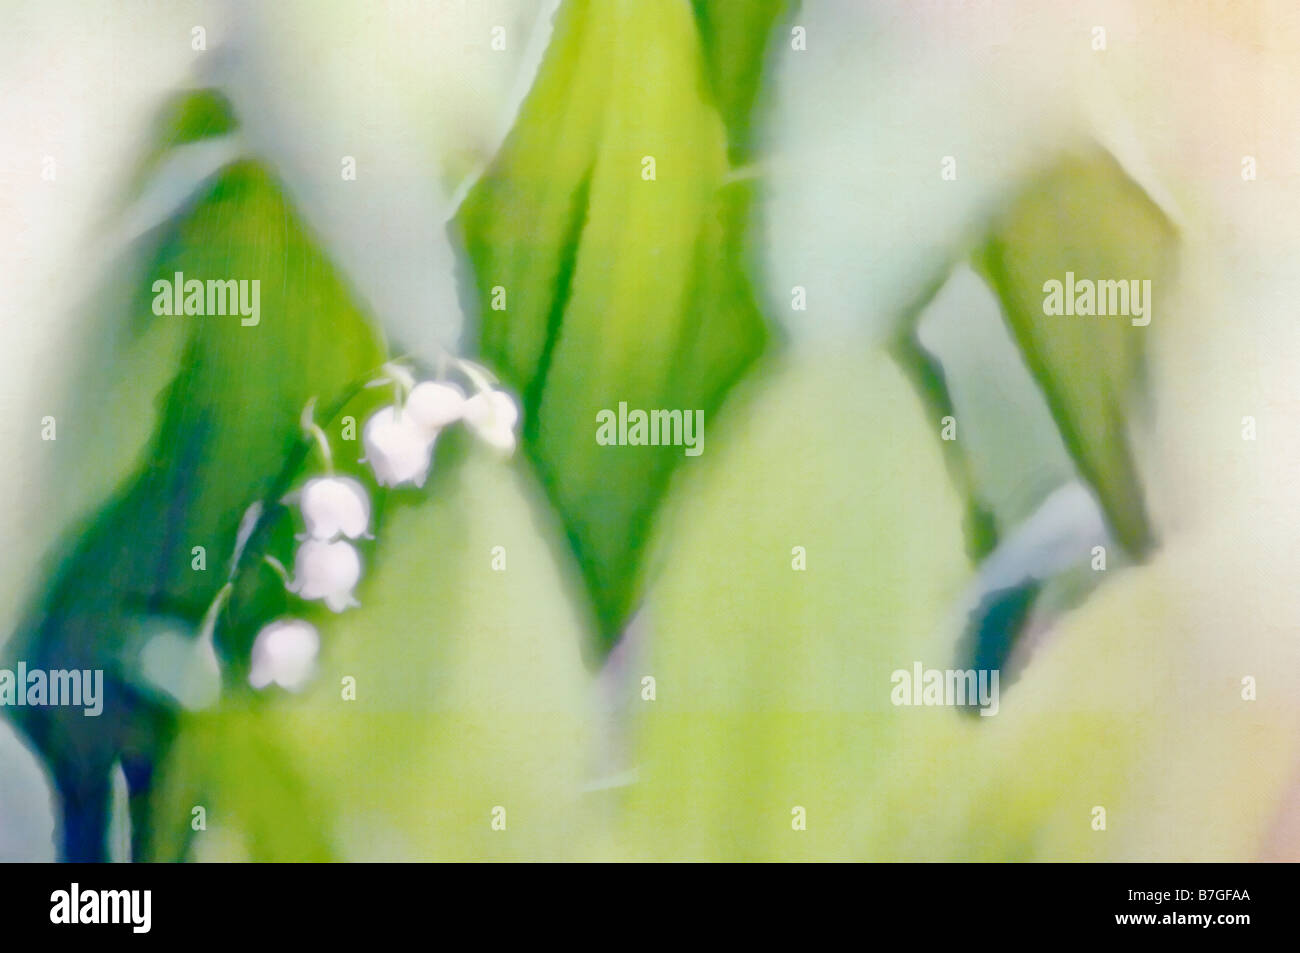 PAinterly Image of White Lily of the Valley Flowers Stock Photo